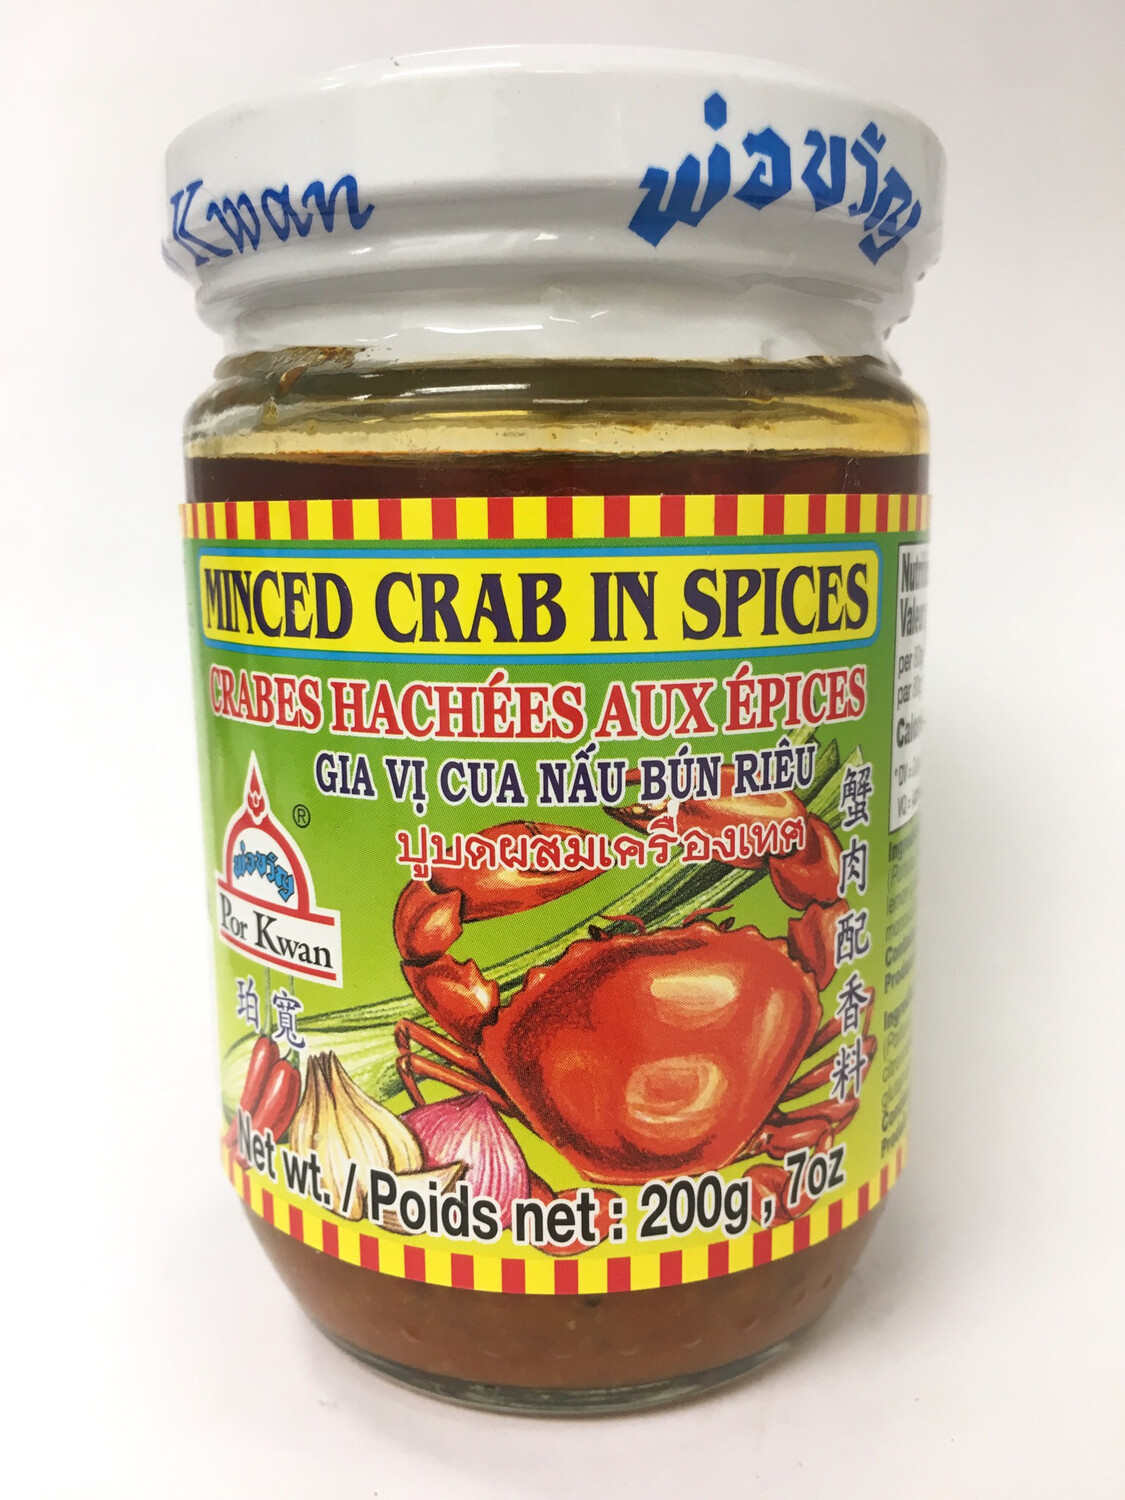 PORKWAN BOTTLE MINCE CRAB IN SPICES 24X200G